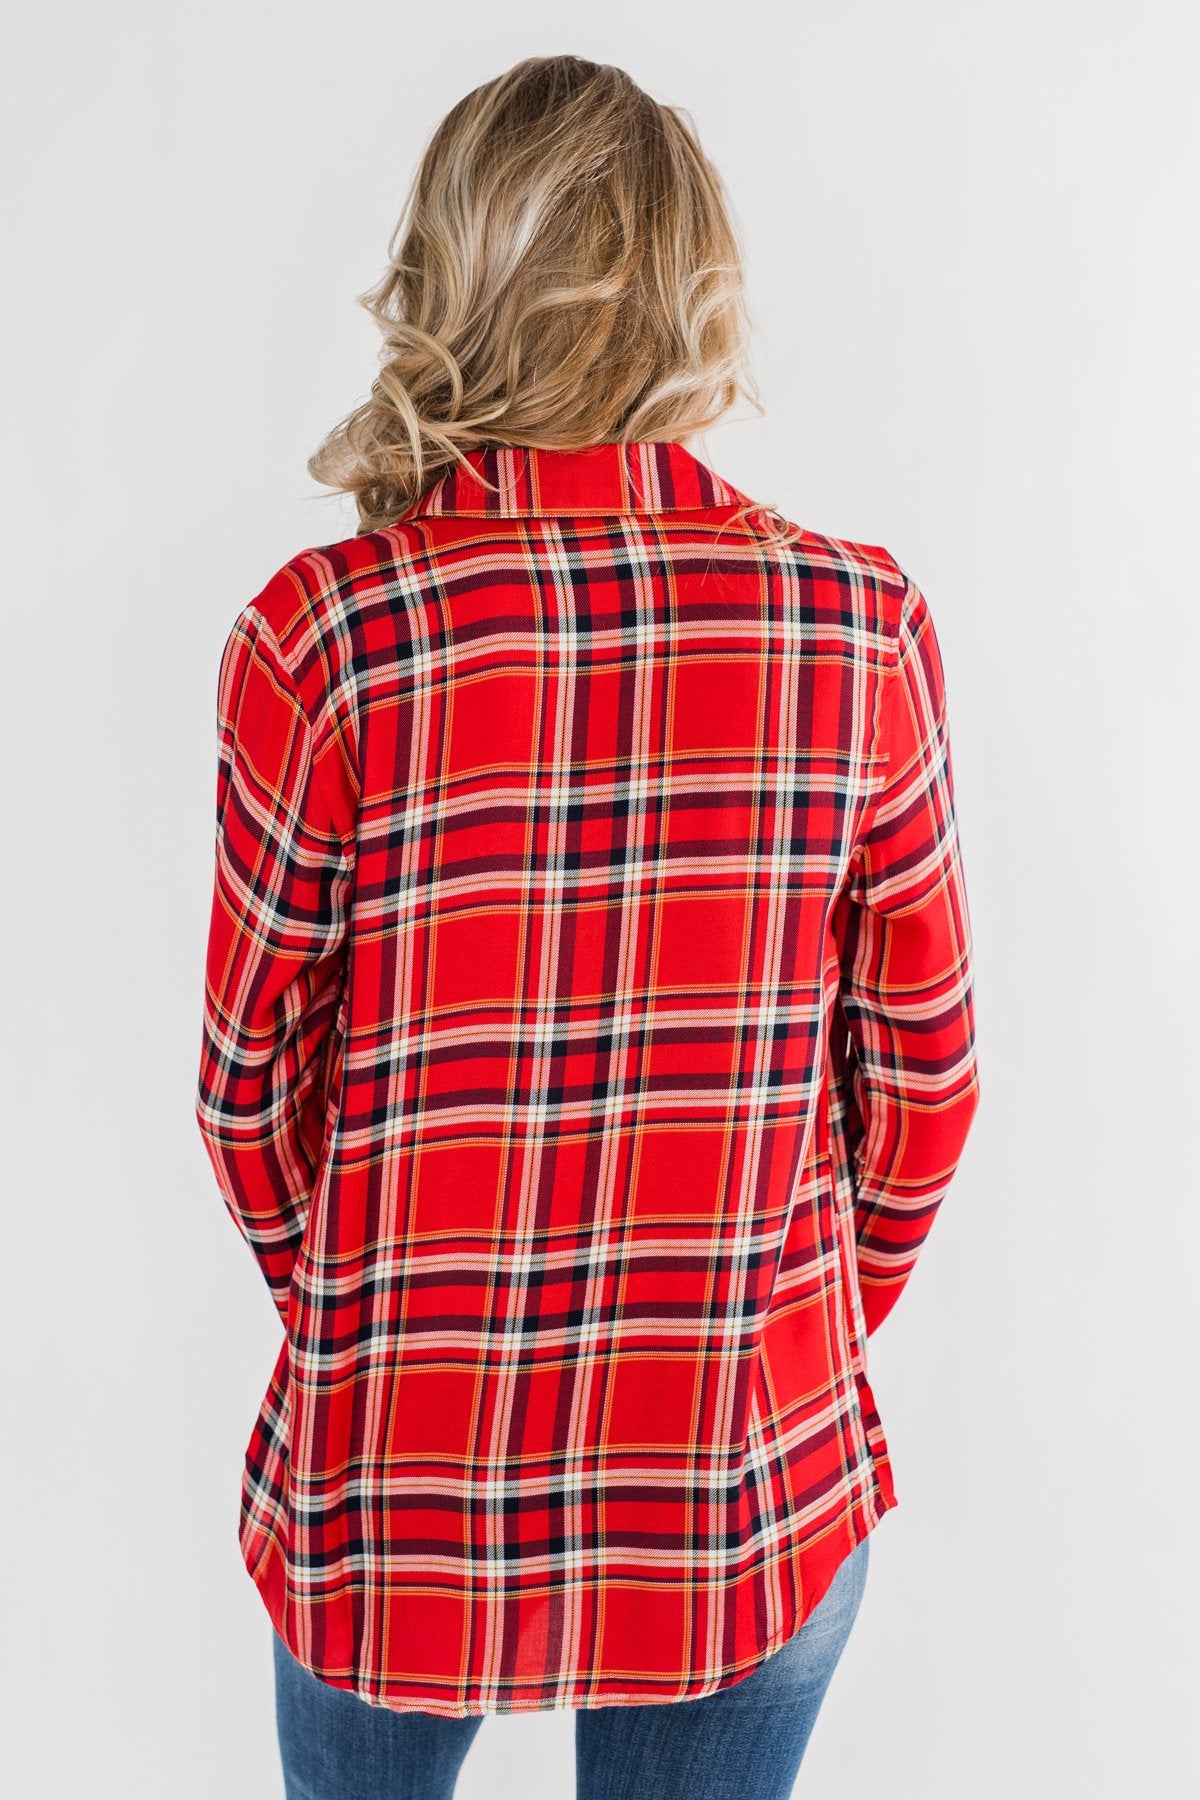 Hello Flannel Button Up Top- Red, Yellow, & Navy